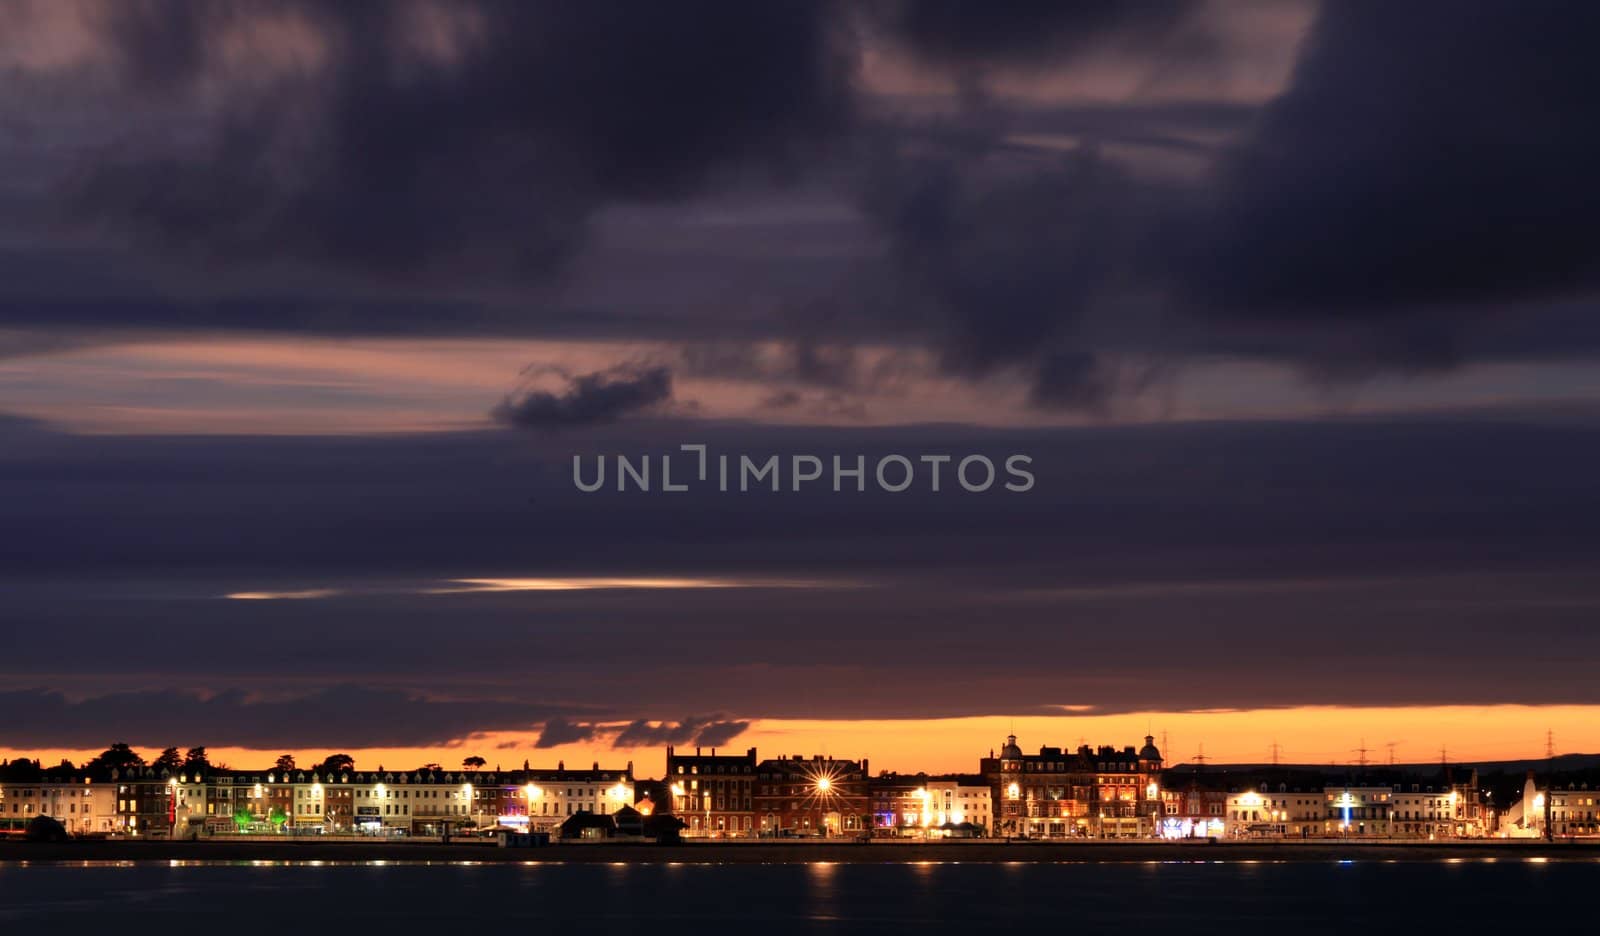 Night sets in  over Weymouth seafront taken from view over the sea